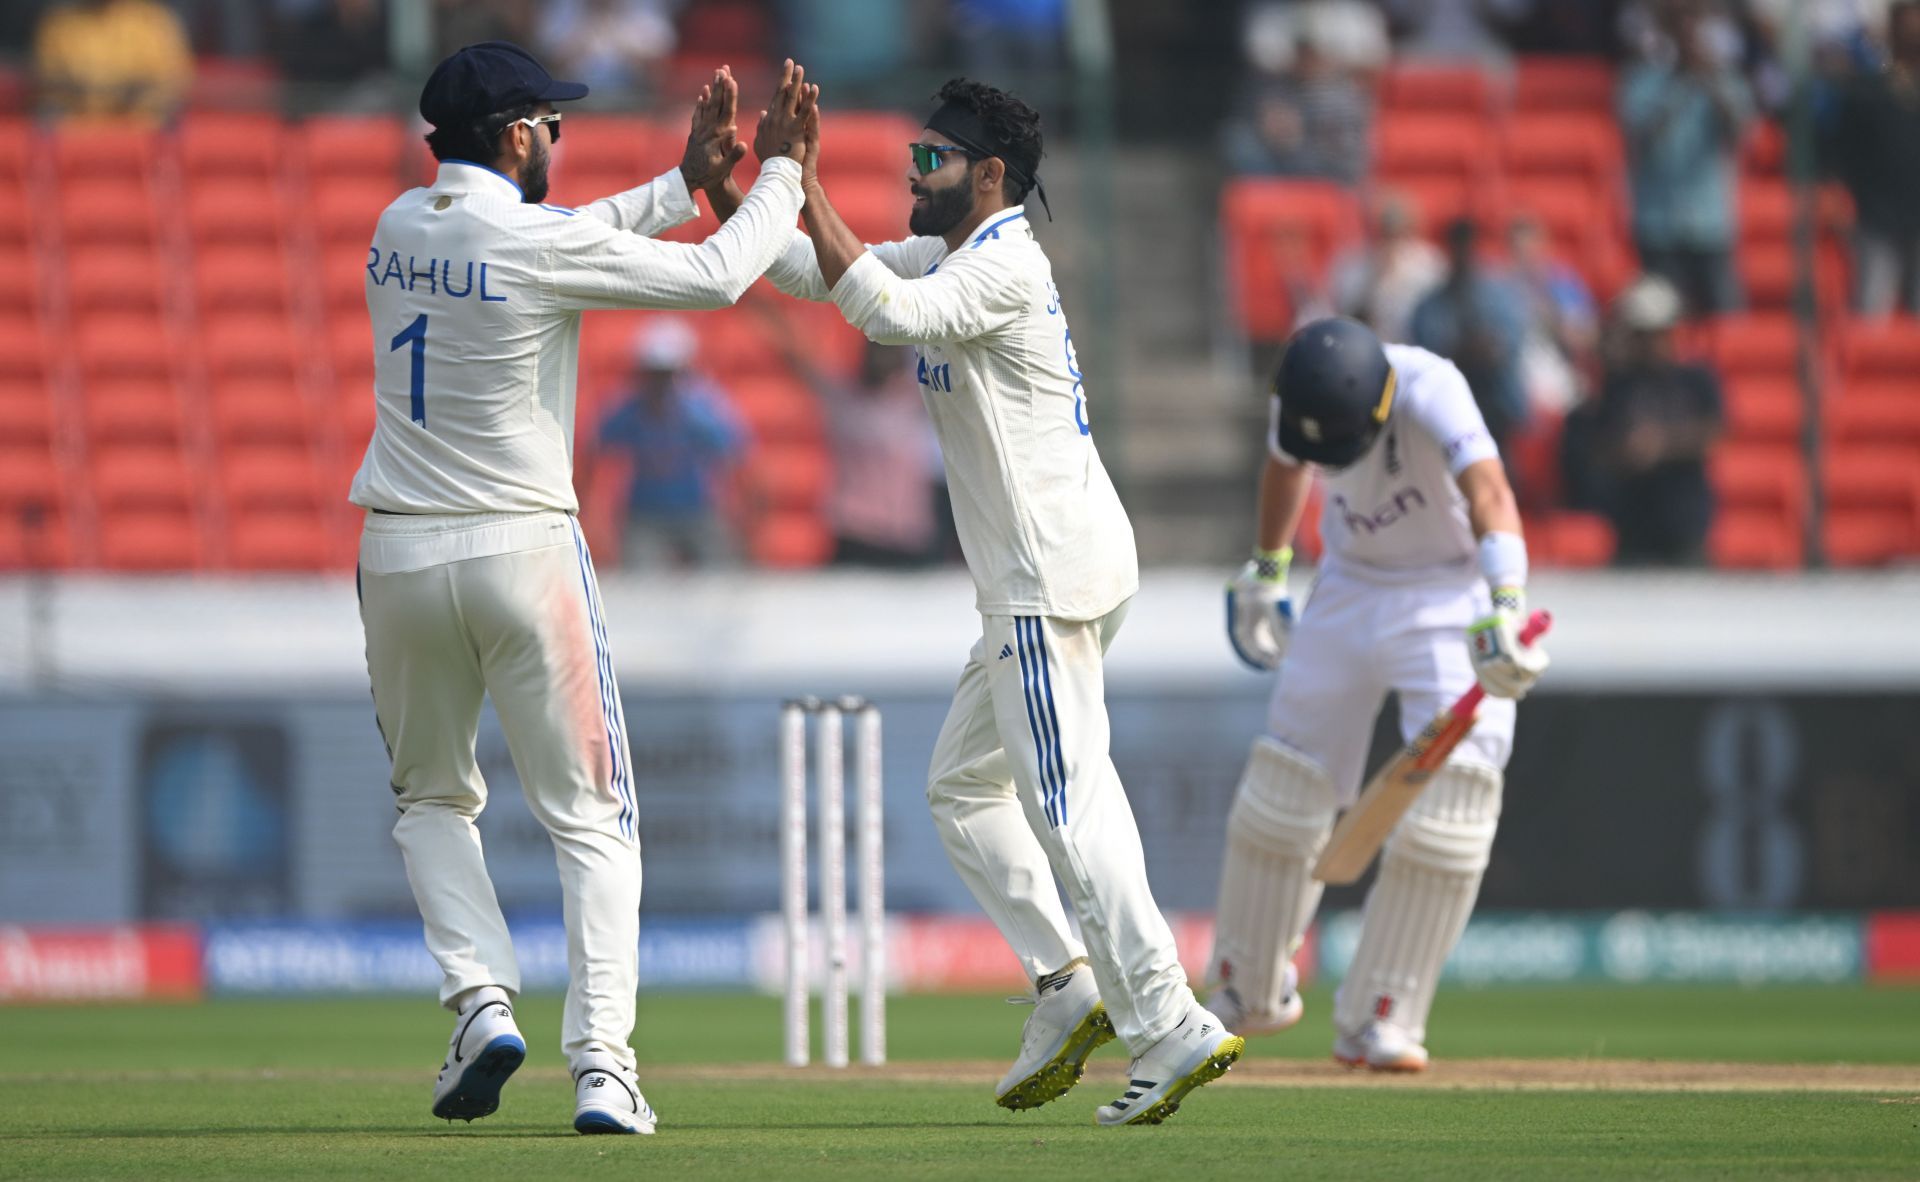 KL Rahul (left) and Ravindra Jadeja have been ruled out of the second Test against England. (Pic: Getty Images)